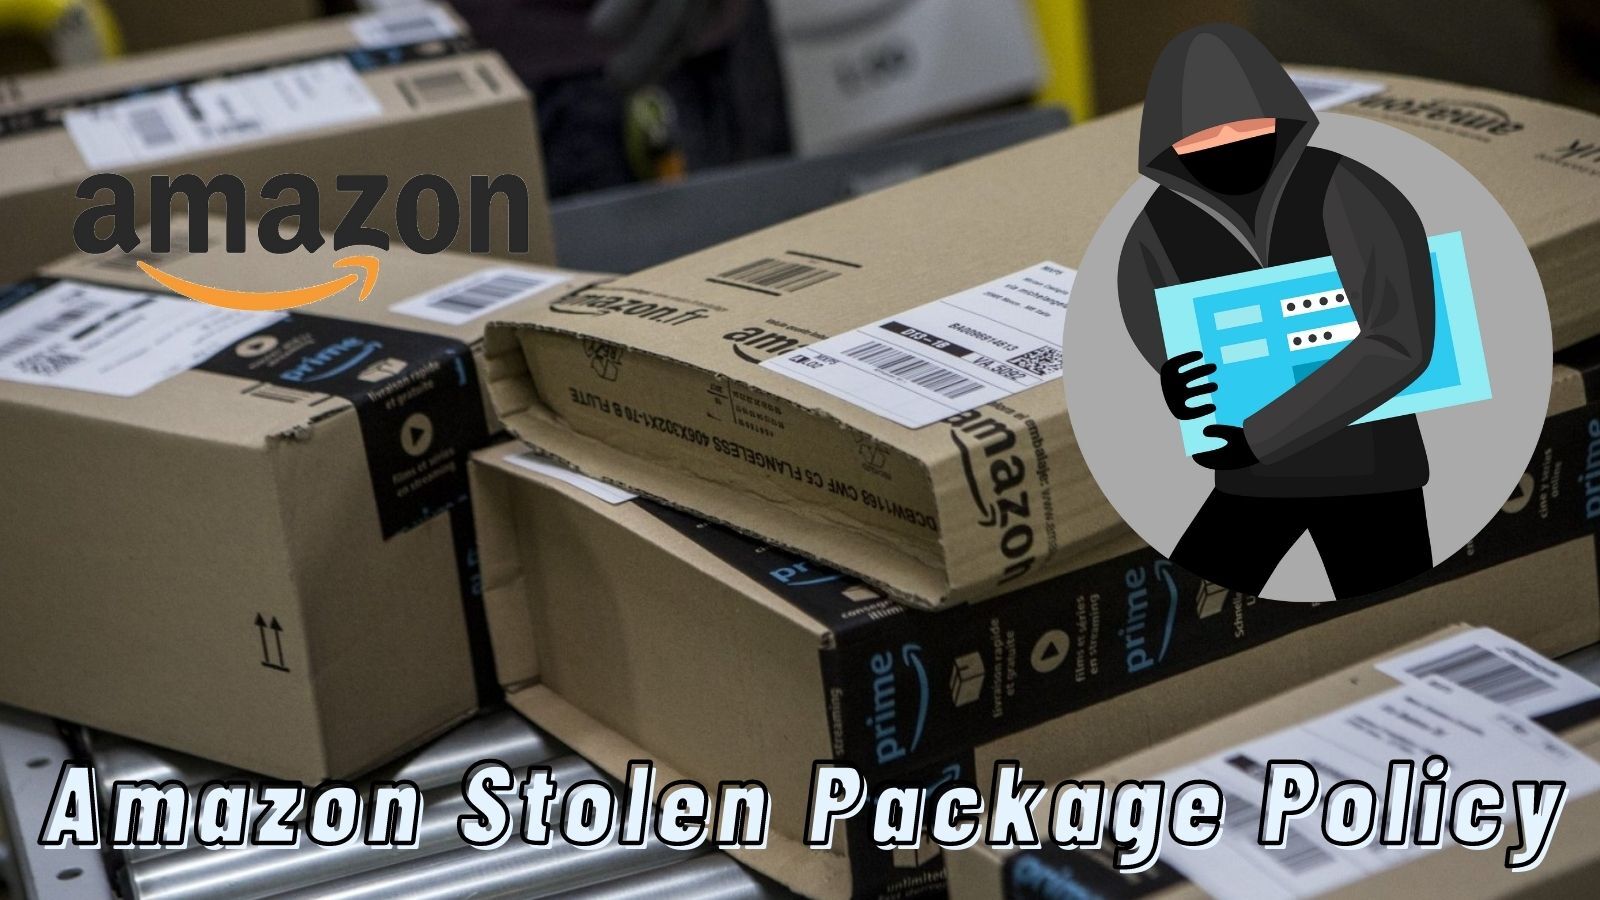 Amazon Stolen Package Policy (Here Are Some Things You Should Know!)